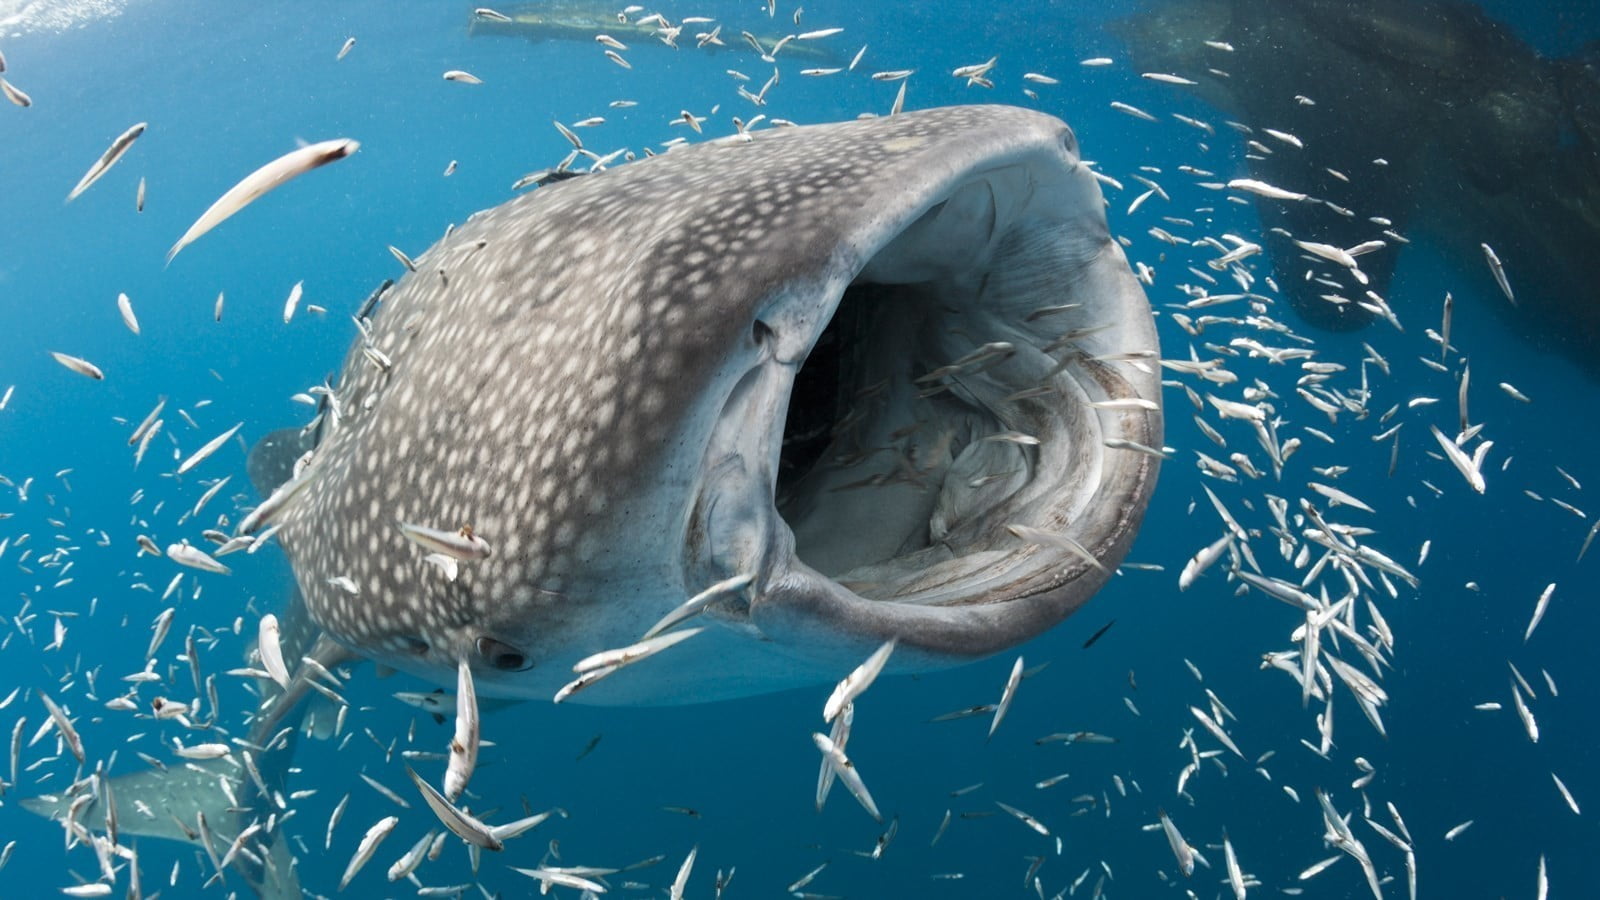 The largest fish in the world